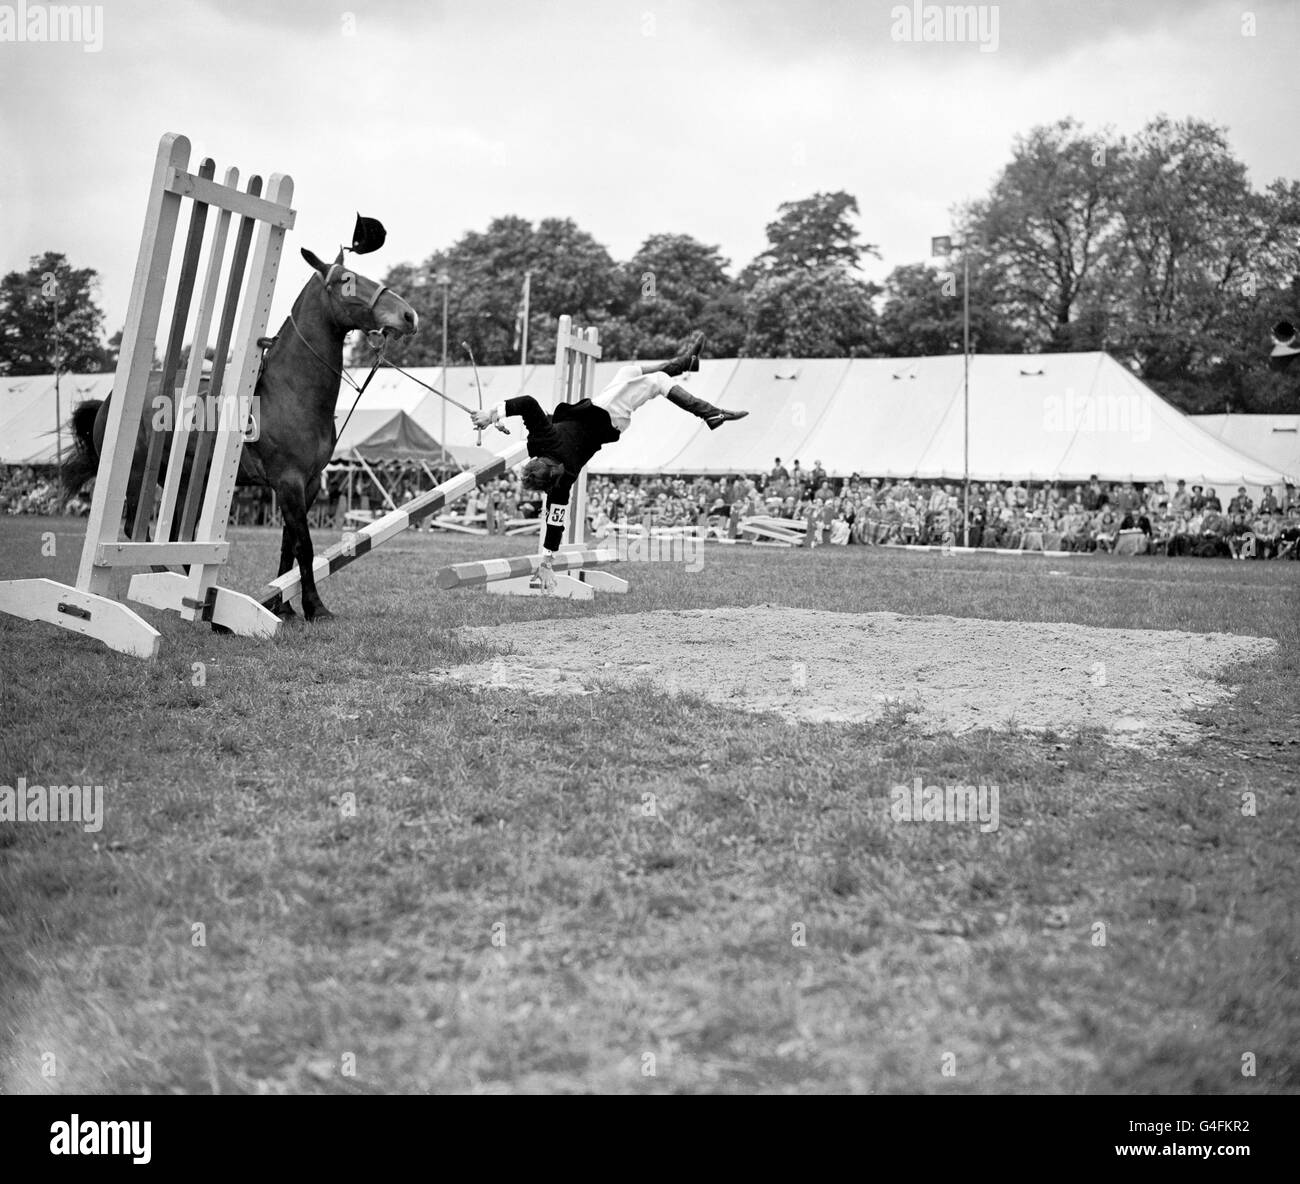 Rider D. Kent falls from his horse, Sugar Bush, during the Six Bars Jumping Competition at the Royal Windsor Horse Show Stock Photo